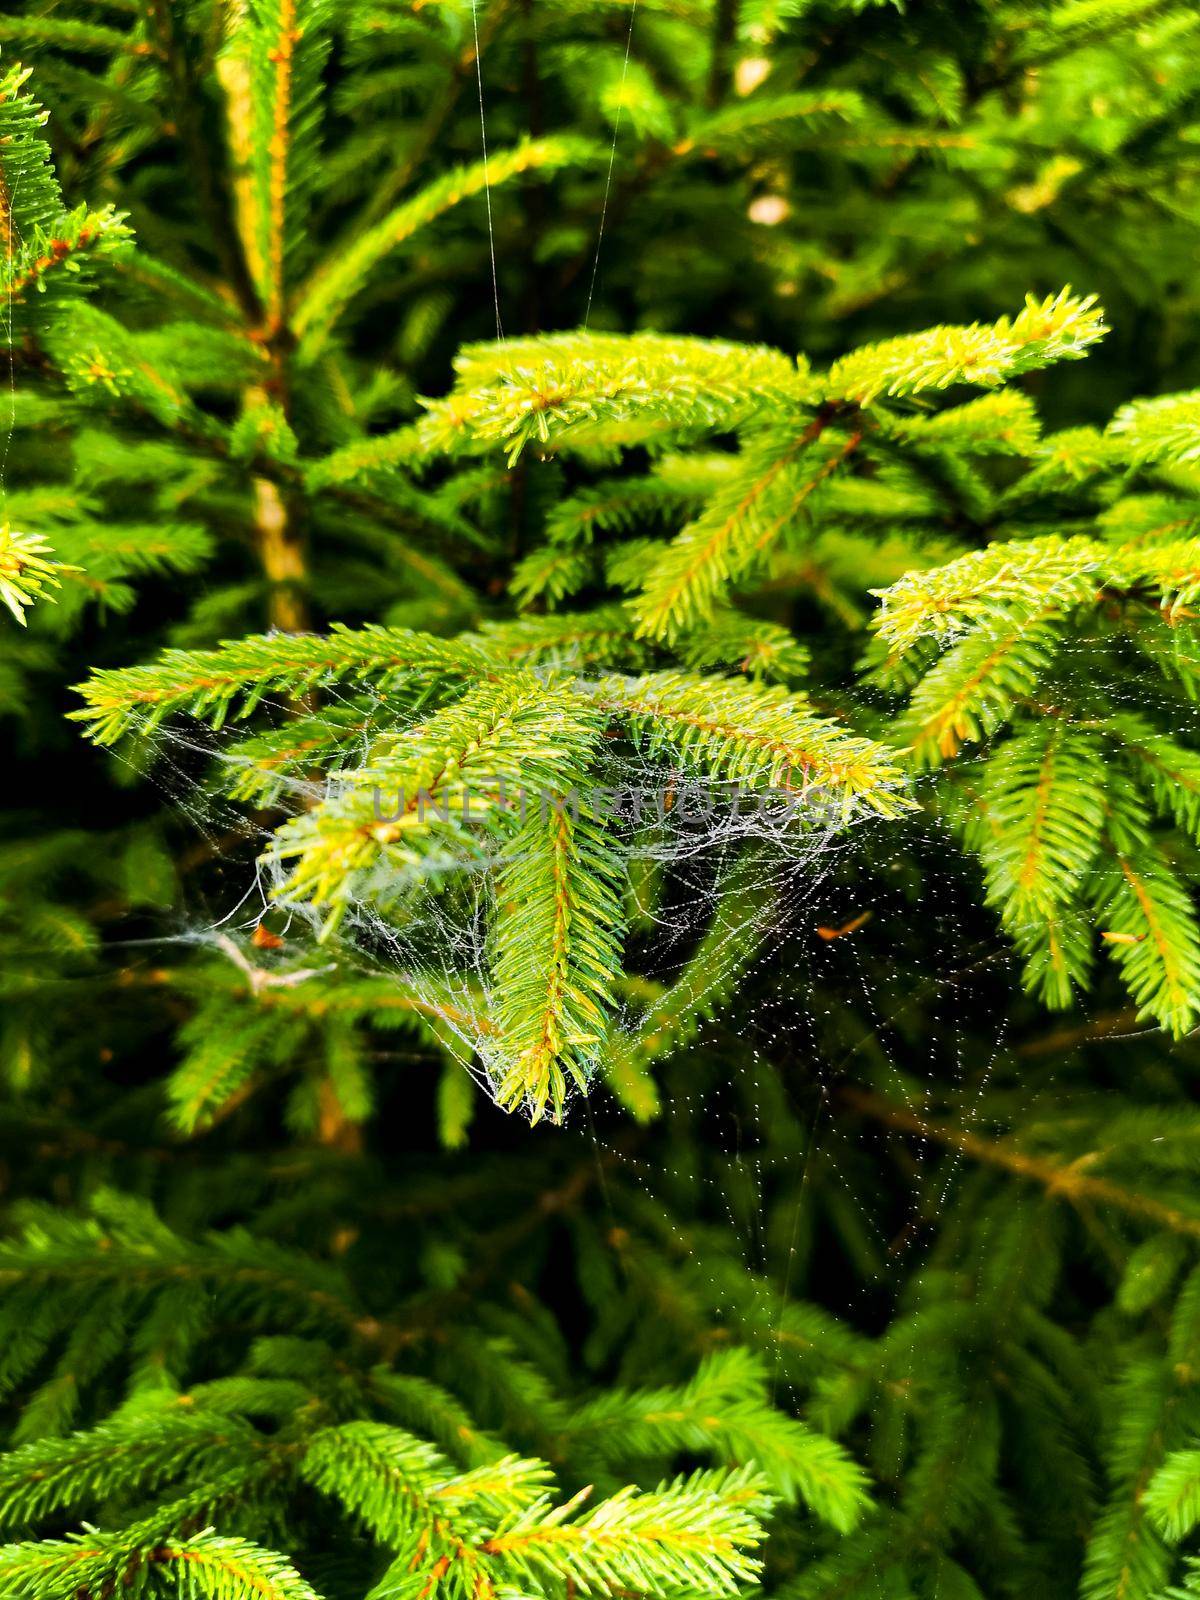 Small trees and bushes next to mountain trail full of spiders web with morning dew by Wierzchu